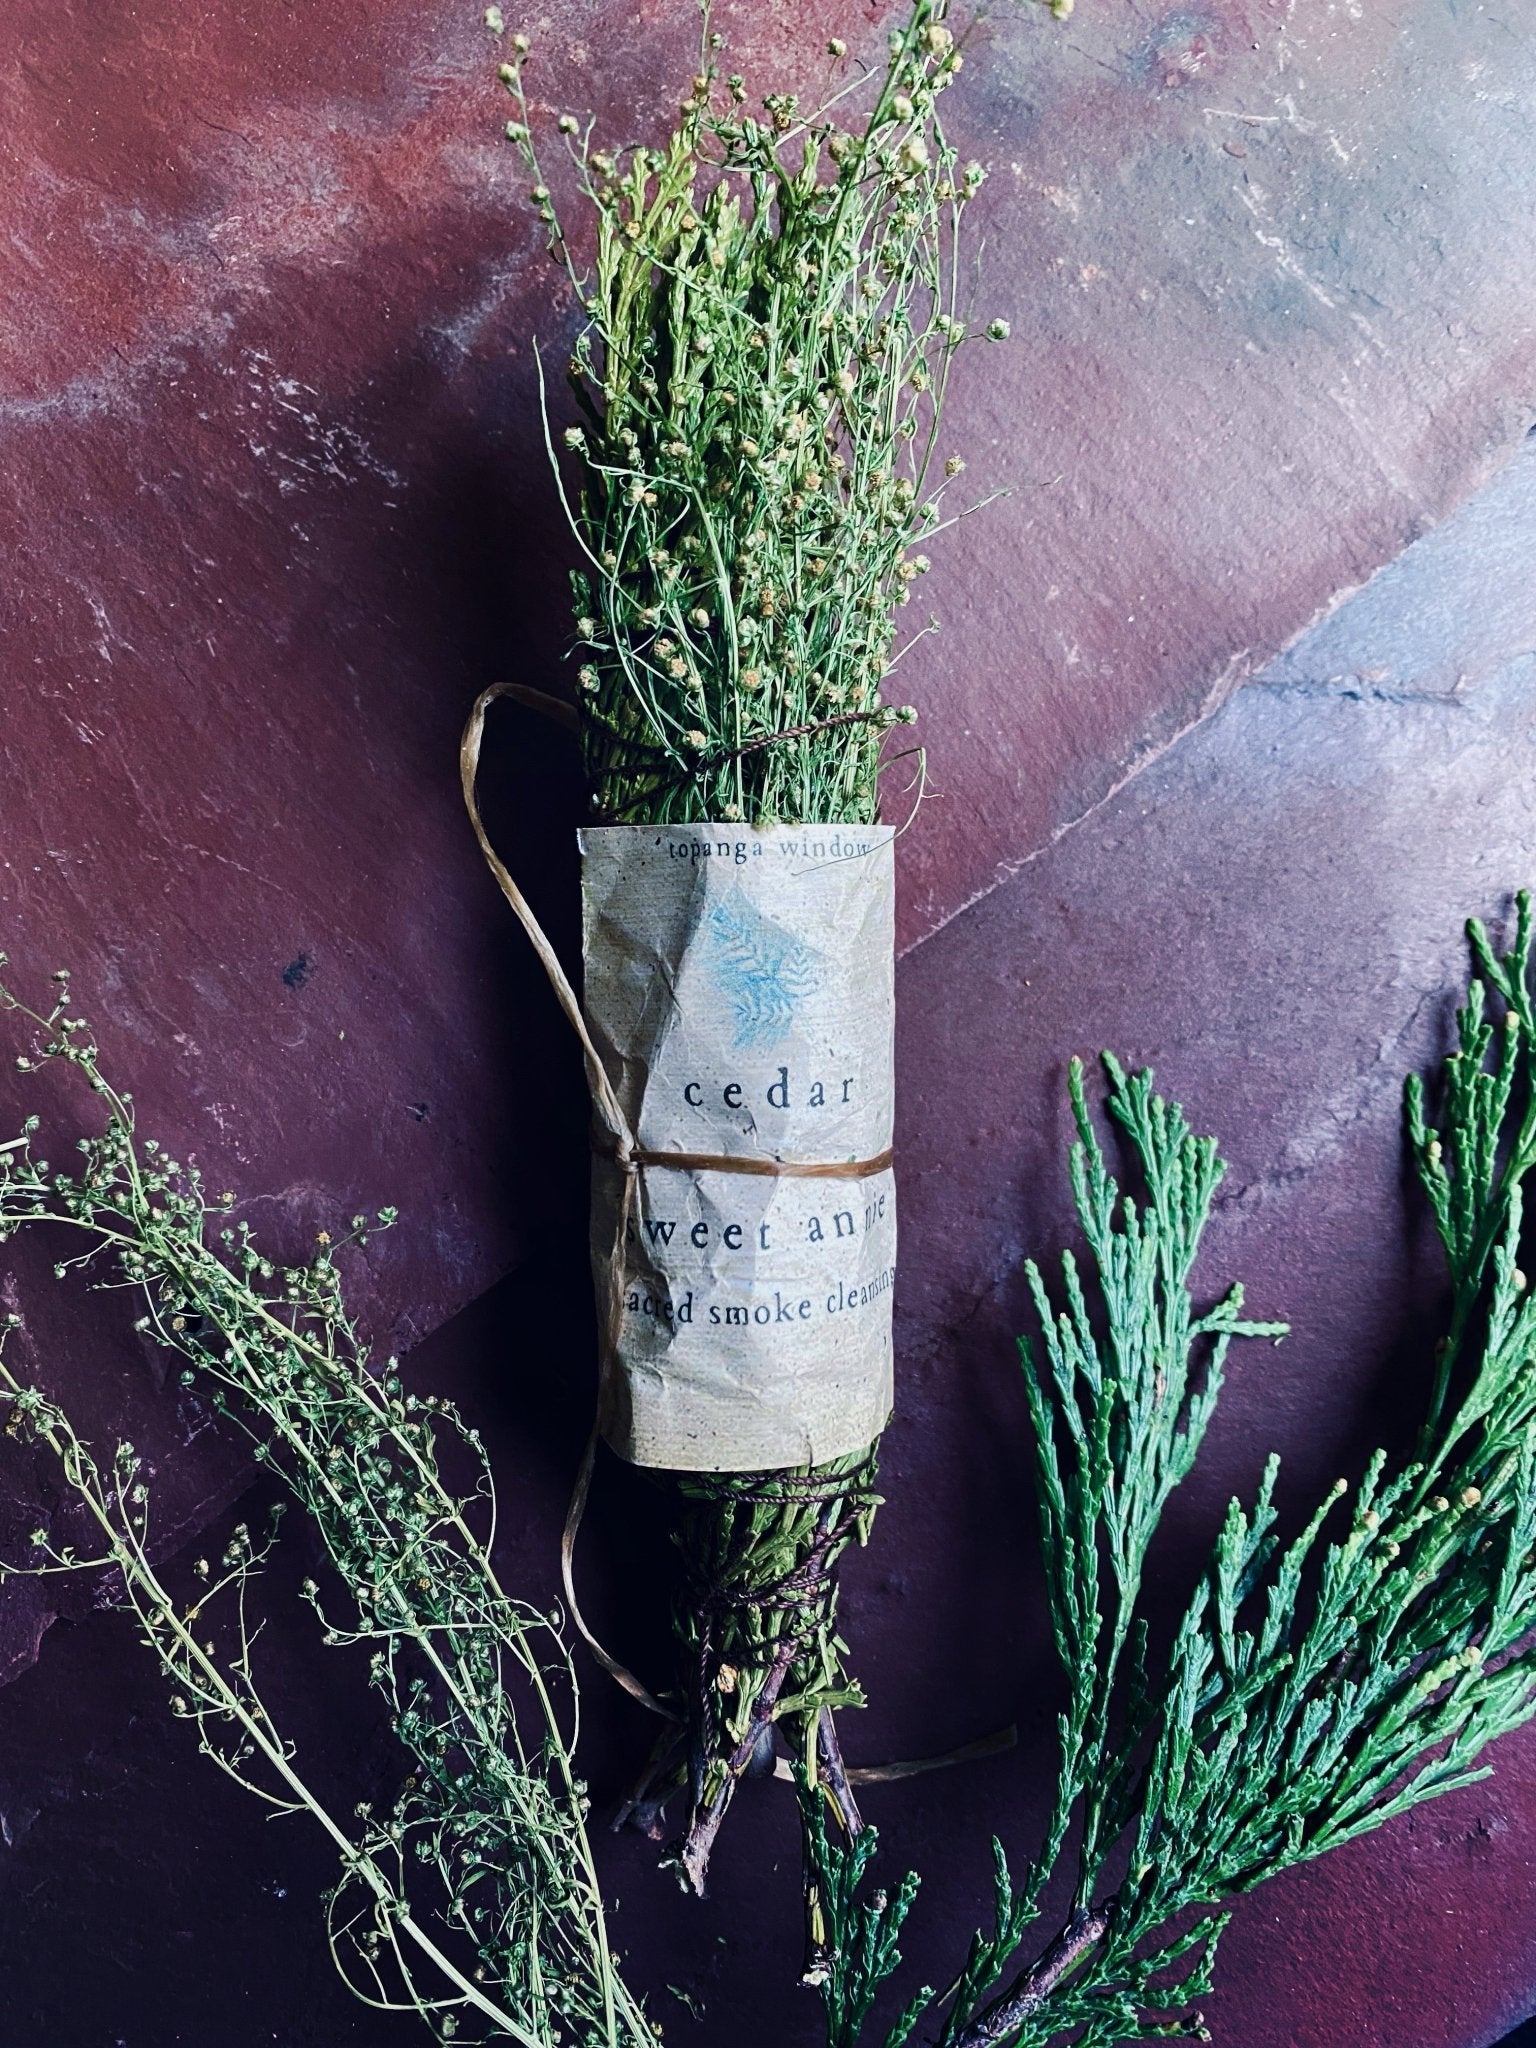 CEDAR STICK MADE WITH SWEET ANNIE.  BUNDLED TOGETHER WITH A WHITE PAPER LABEL AND BROWN ORGANIC THREAD.  uSED TO CLEANSE ENERGY IN SACRED SPACES OR YOUR HOME. 